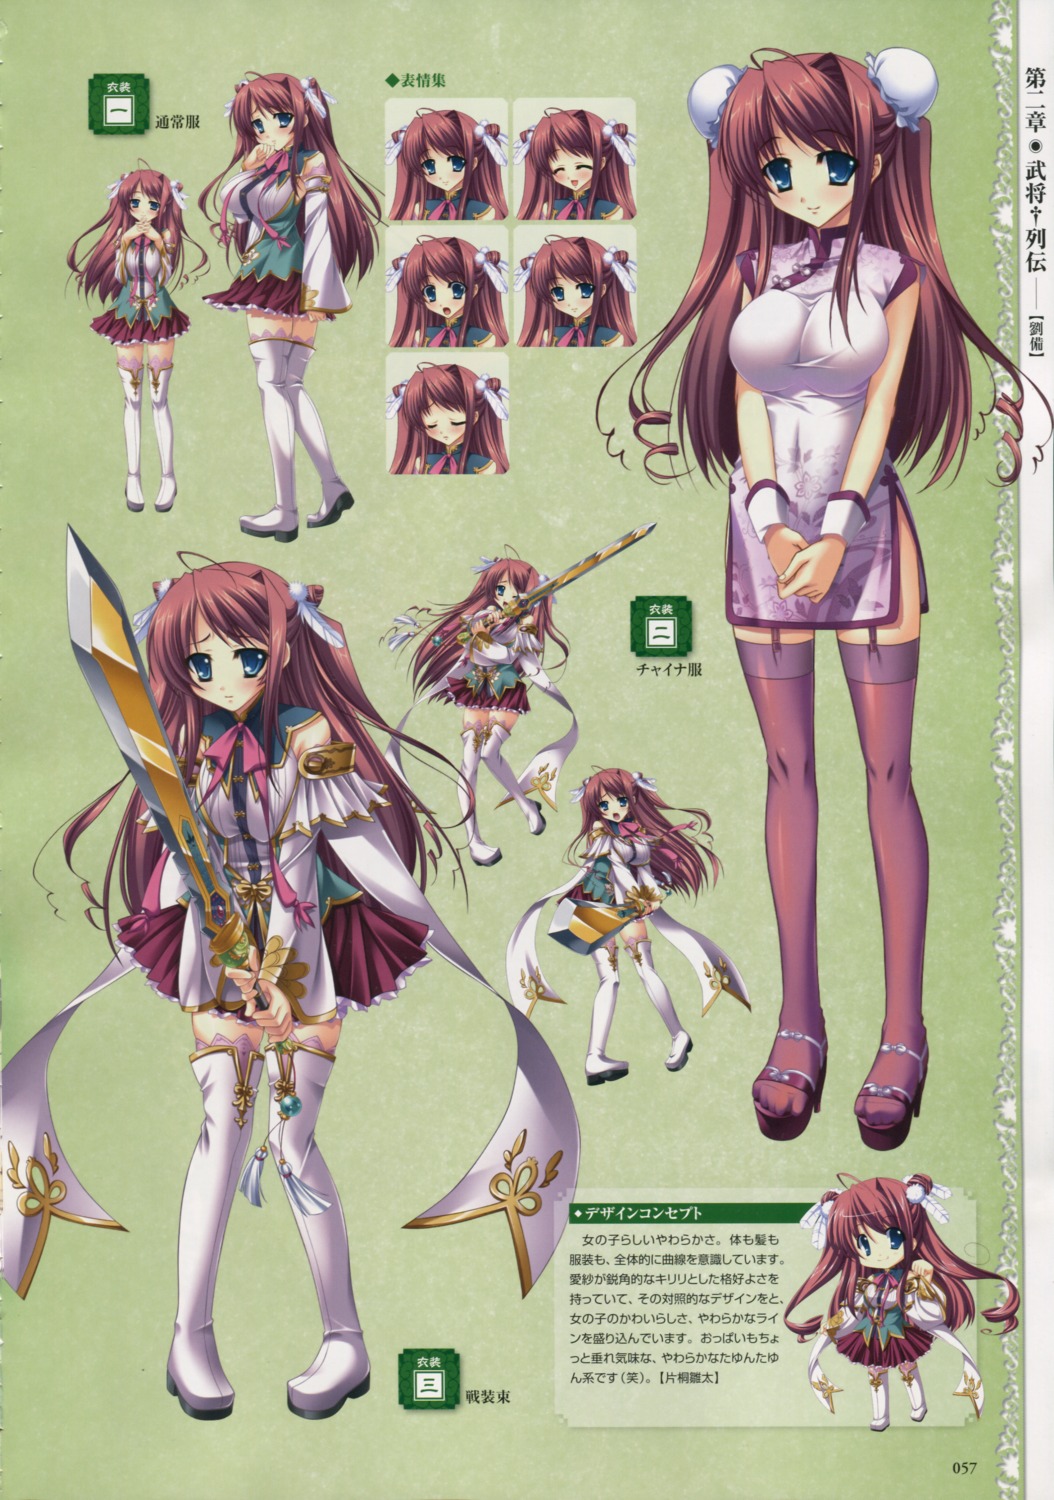 baseson character_design chibi chinadress expression koihime_musou ryuubi stockings sword thighhighs